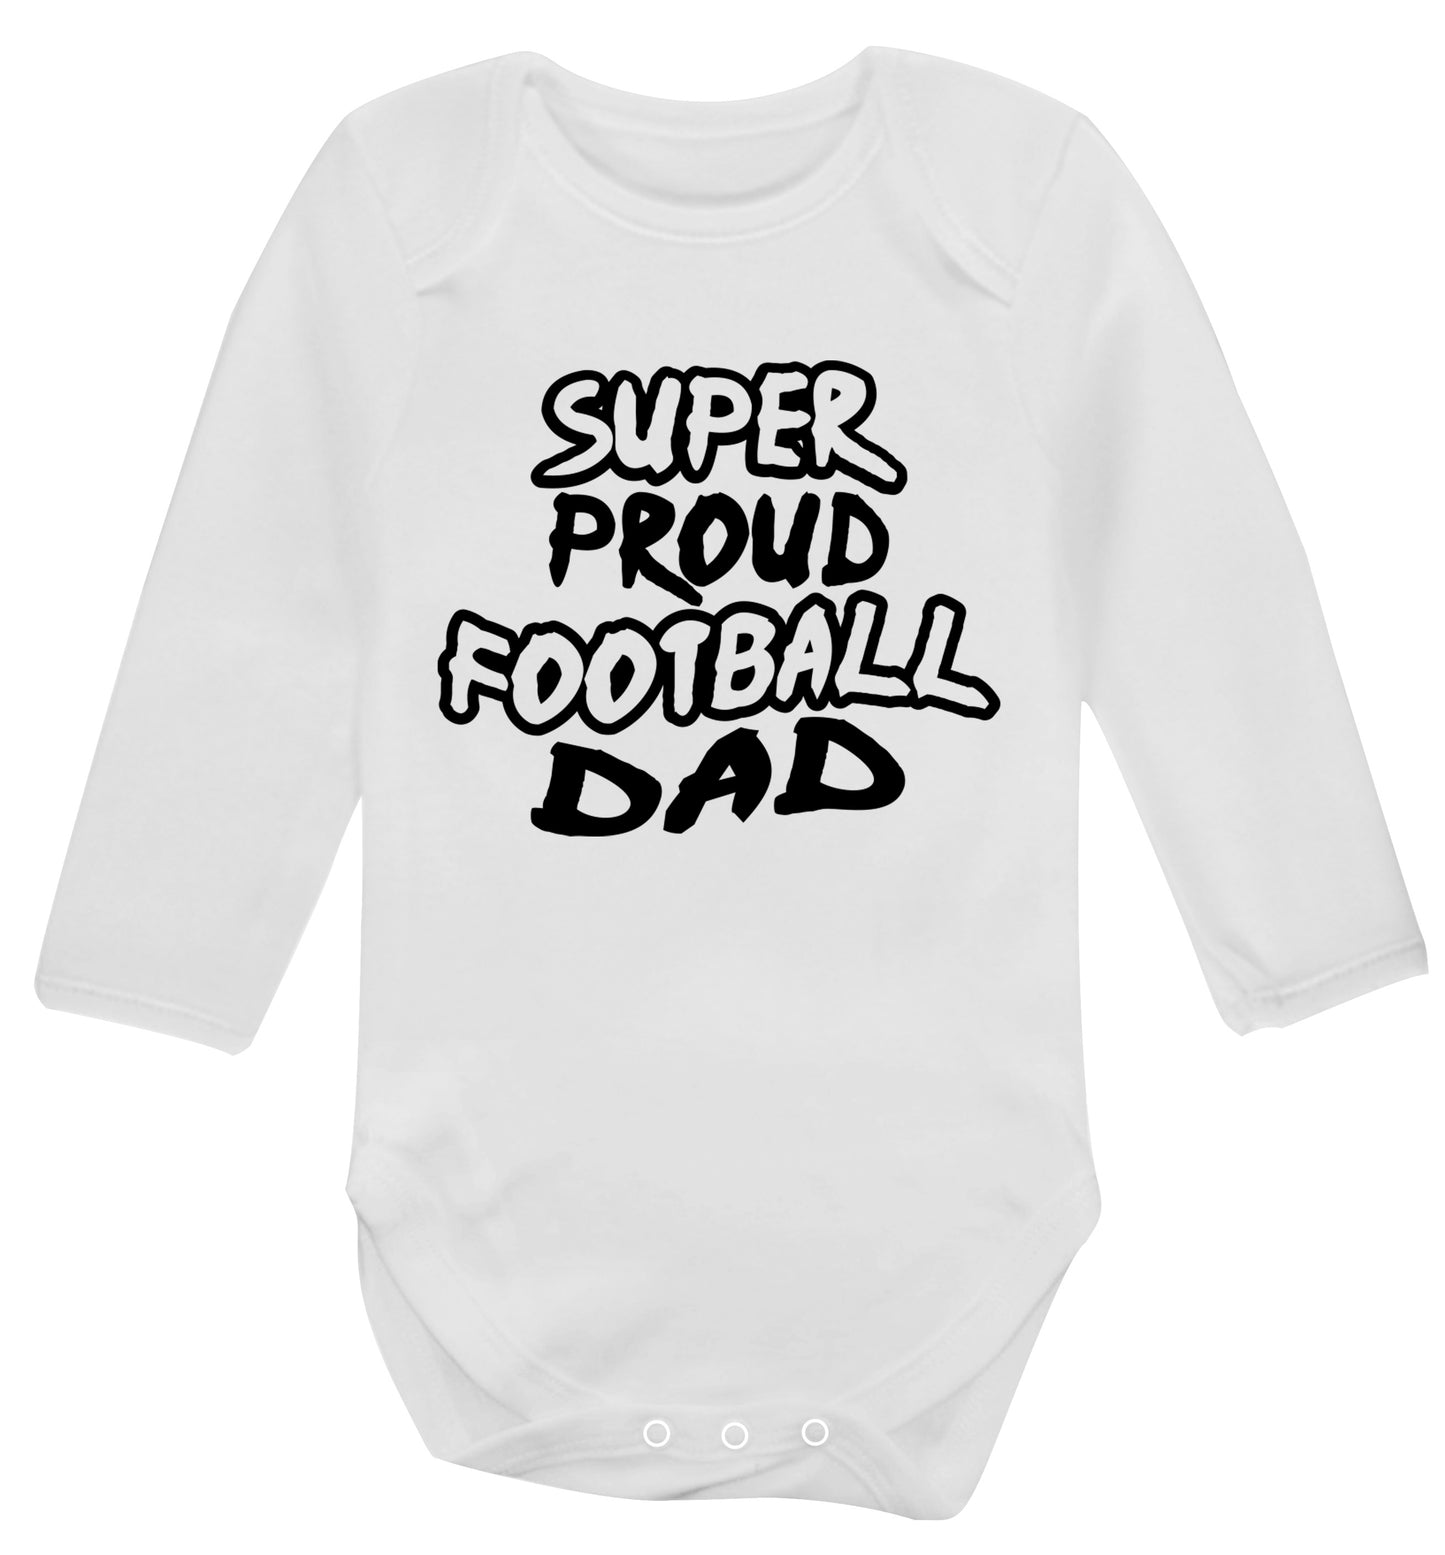 Super proud football dad Baby Vest long sleeved white 6-12 months